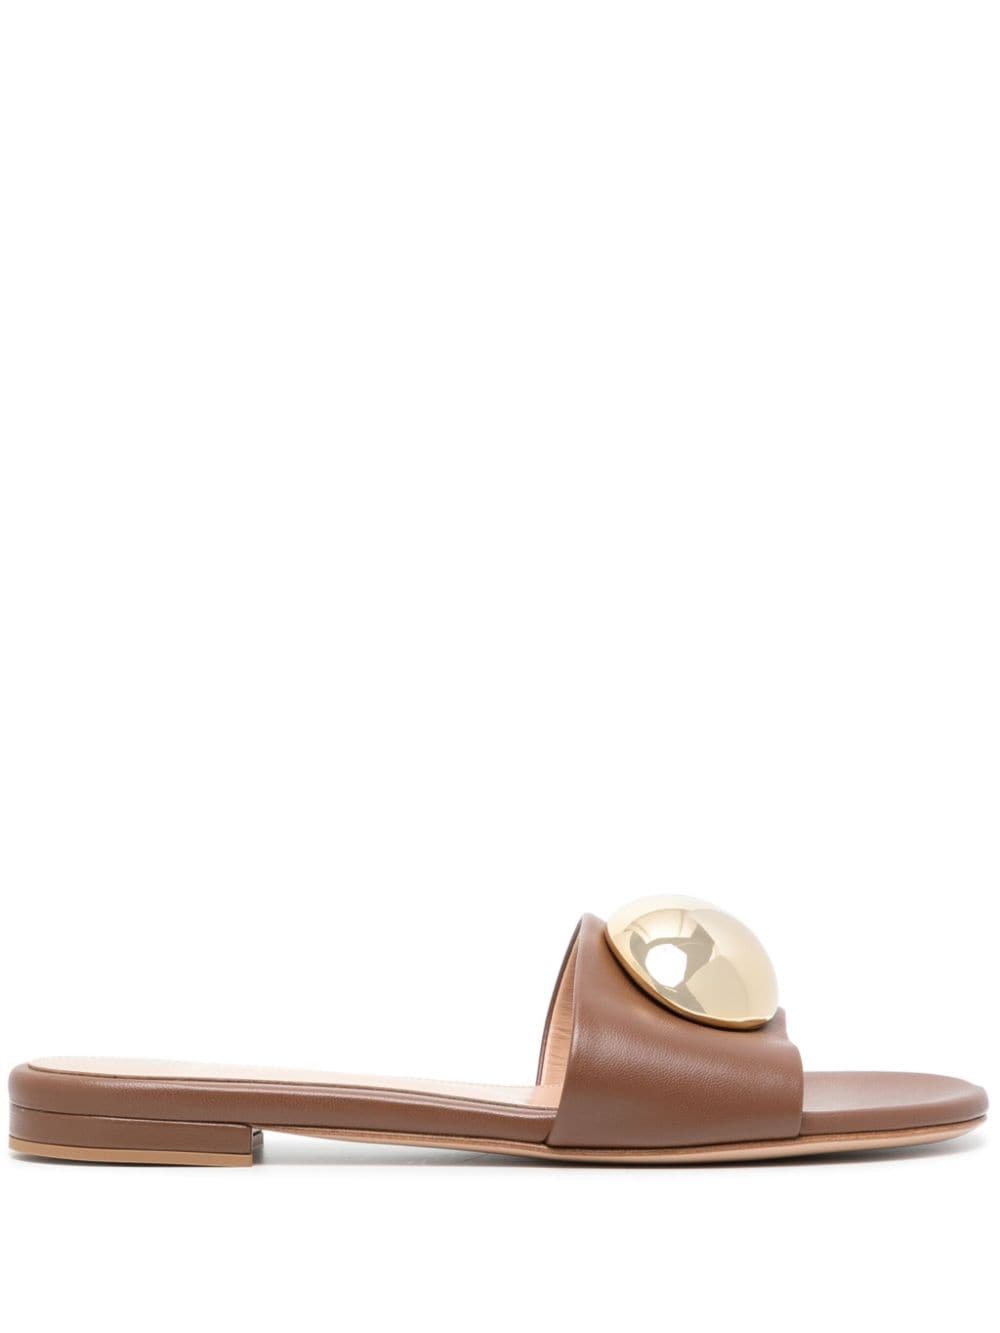 Gianvito Rossi embellished leather sandals - Brown von Gianvito Rossi